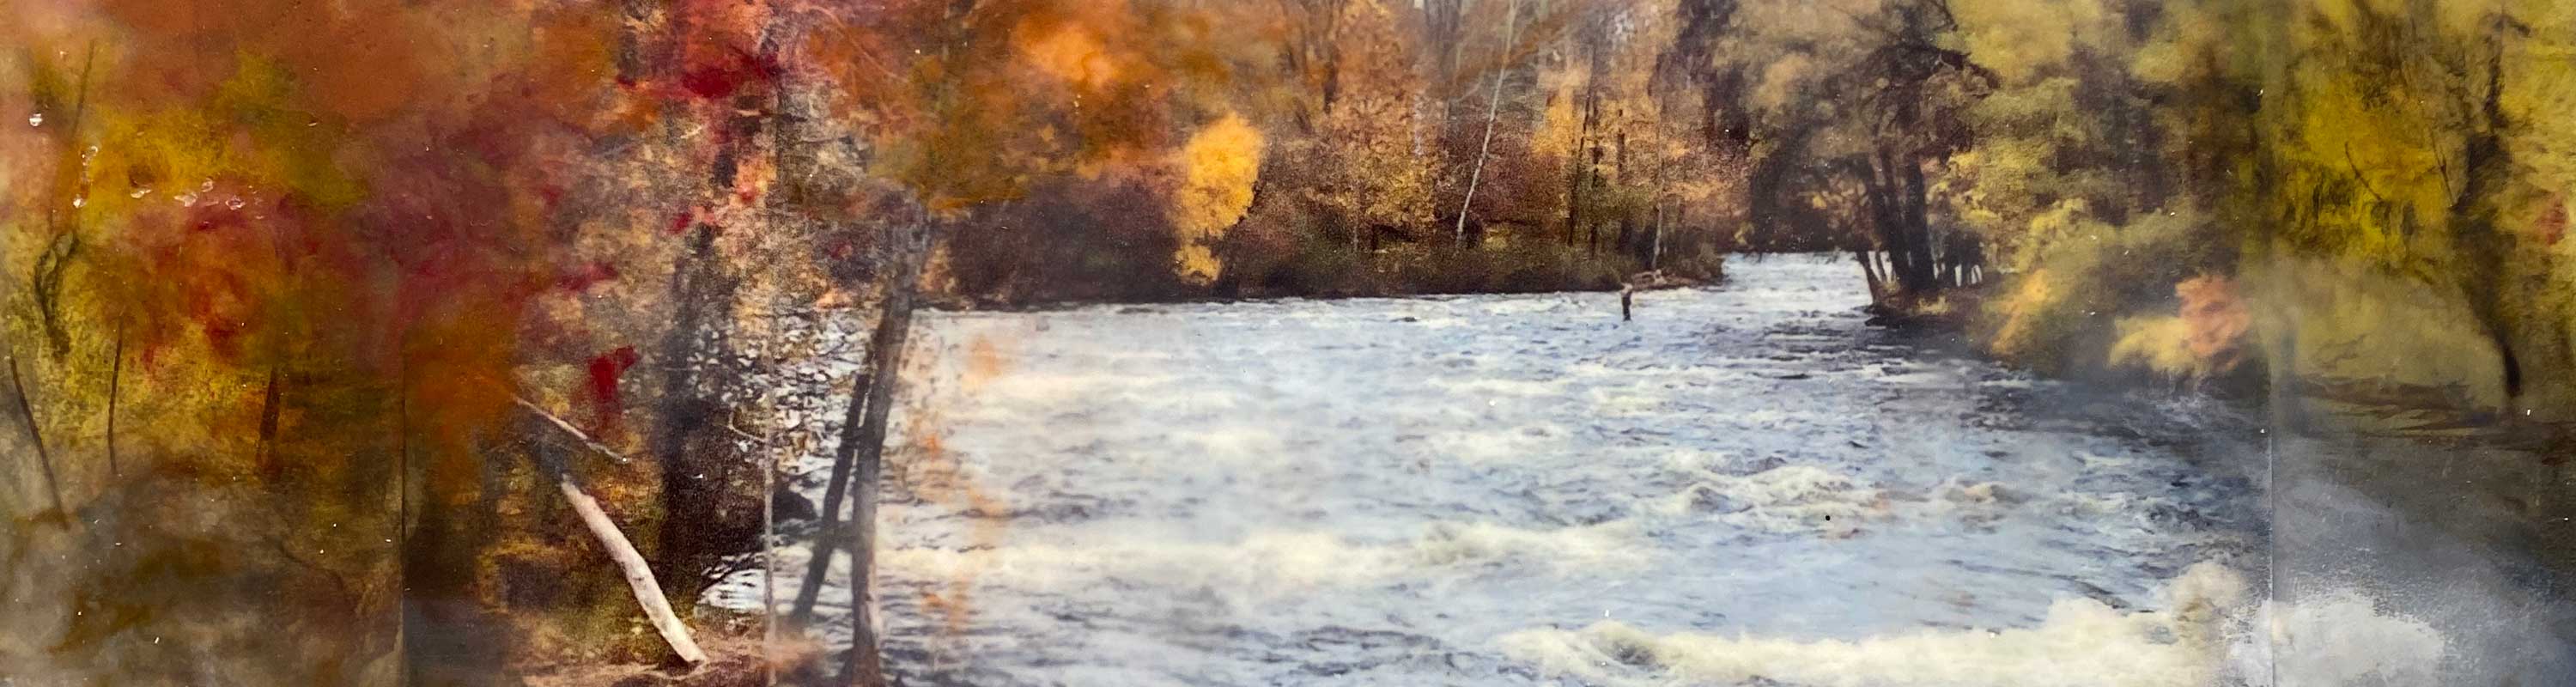 photo encaustic painting of Salmon River during the fall run of salmon